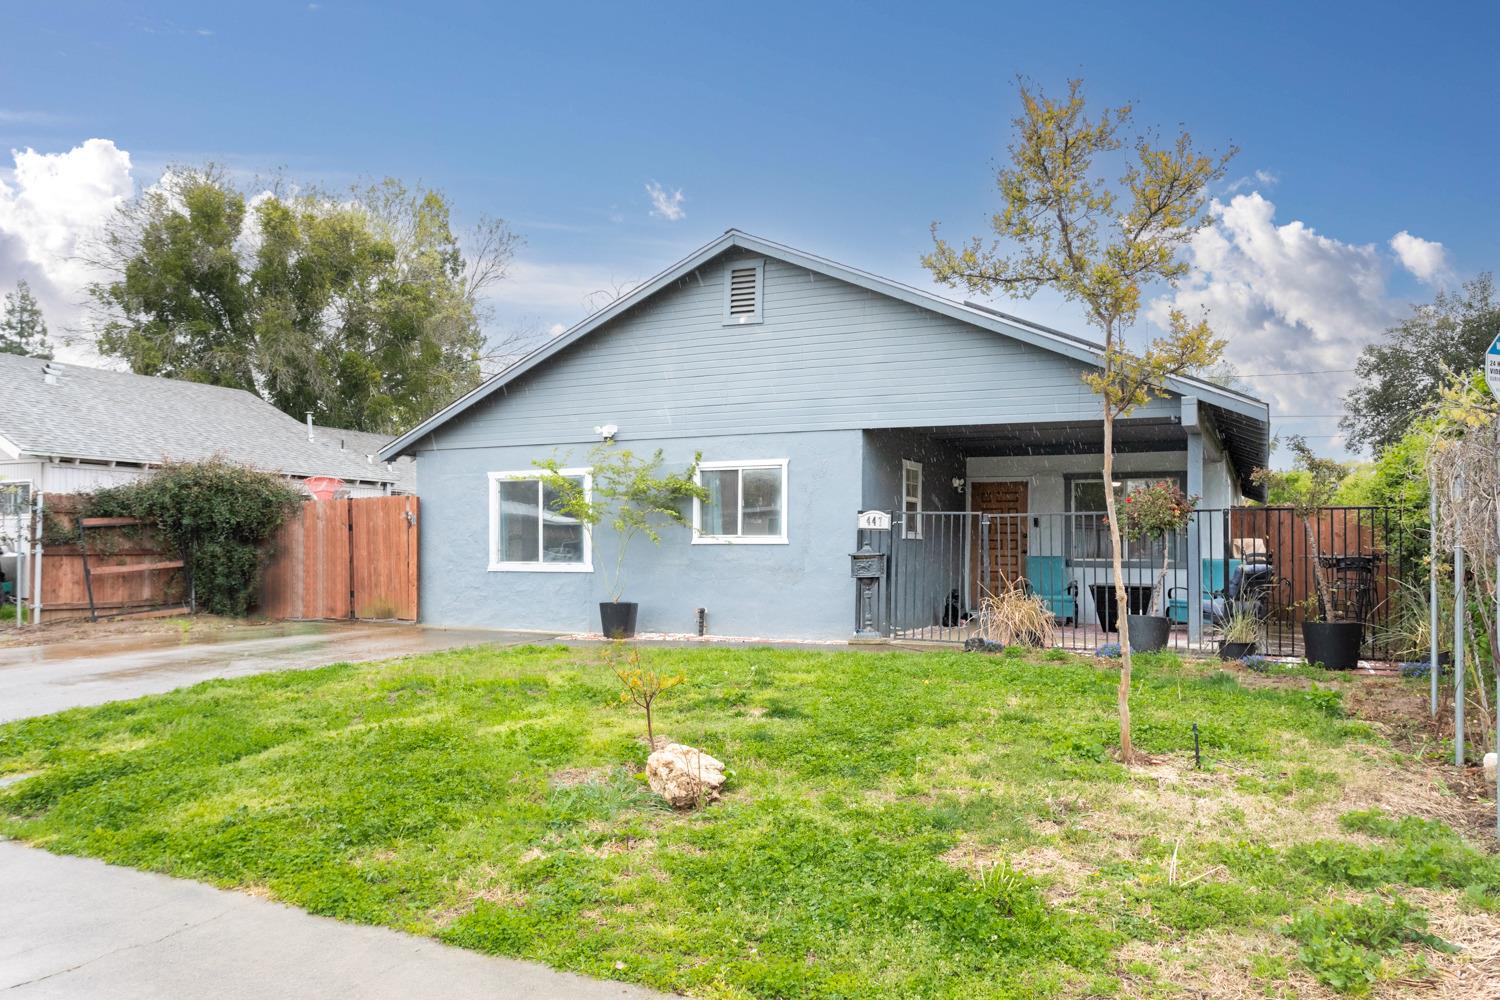 Photo of 447 Sage St in Gridley, CA